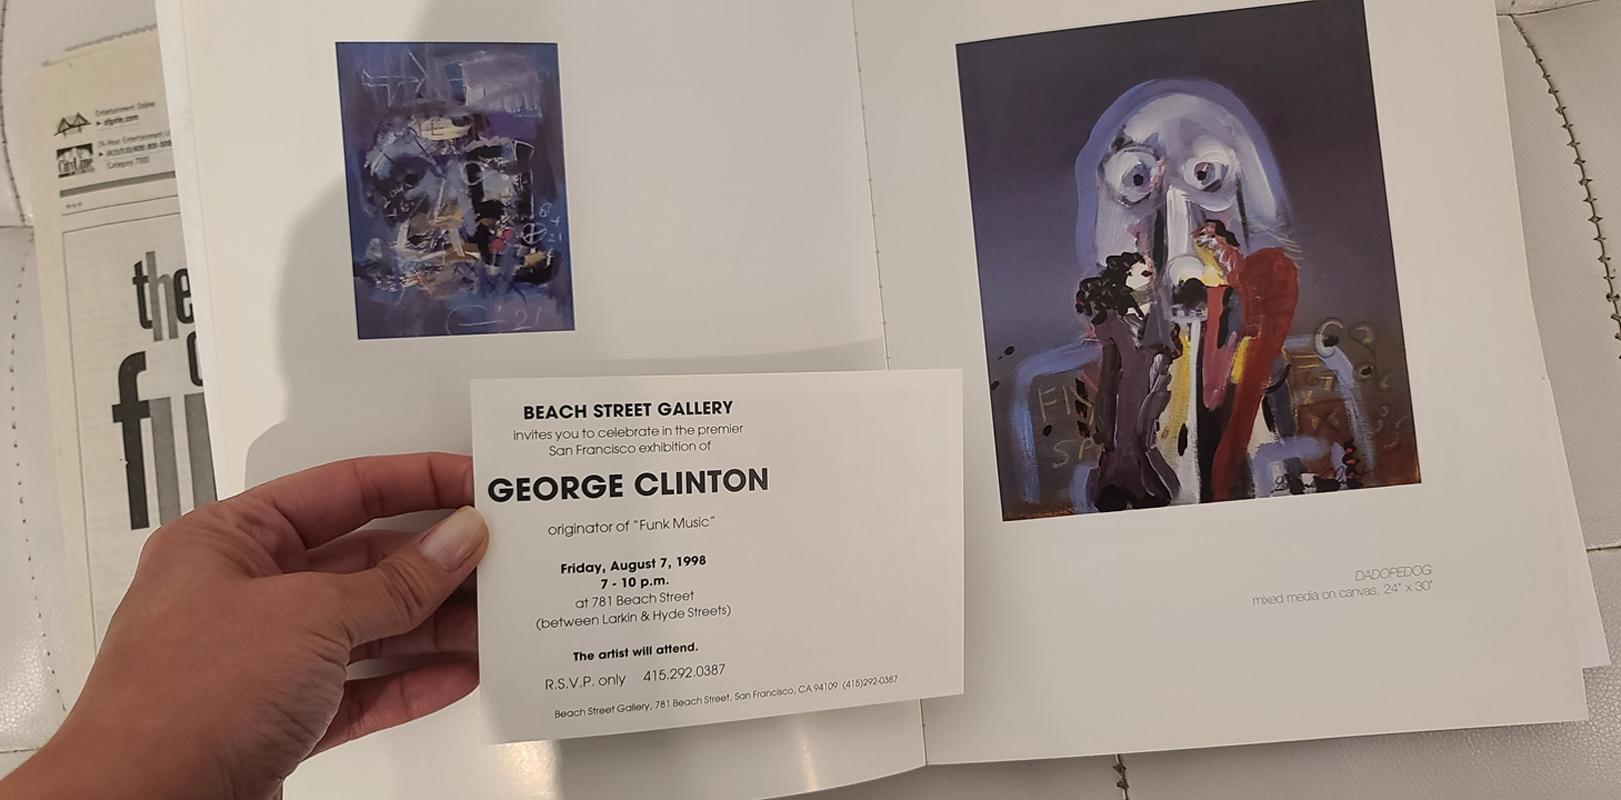 RARE early George Clinton (Parliament Funkadelic musician) that is not only stunning but comes with substantial provenance. Purchase includes the original sale invoice from his first gallery show in 1998, original exhibition catalog and show card in